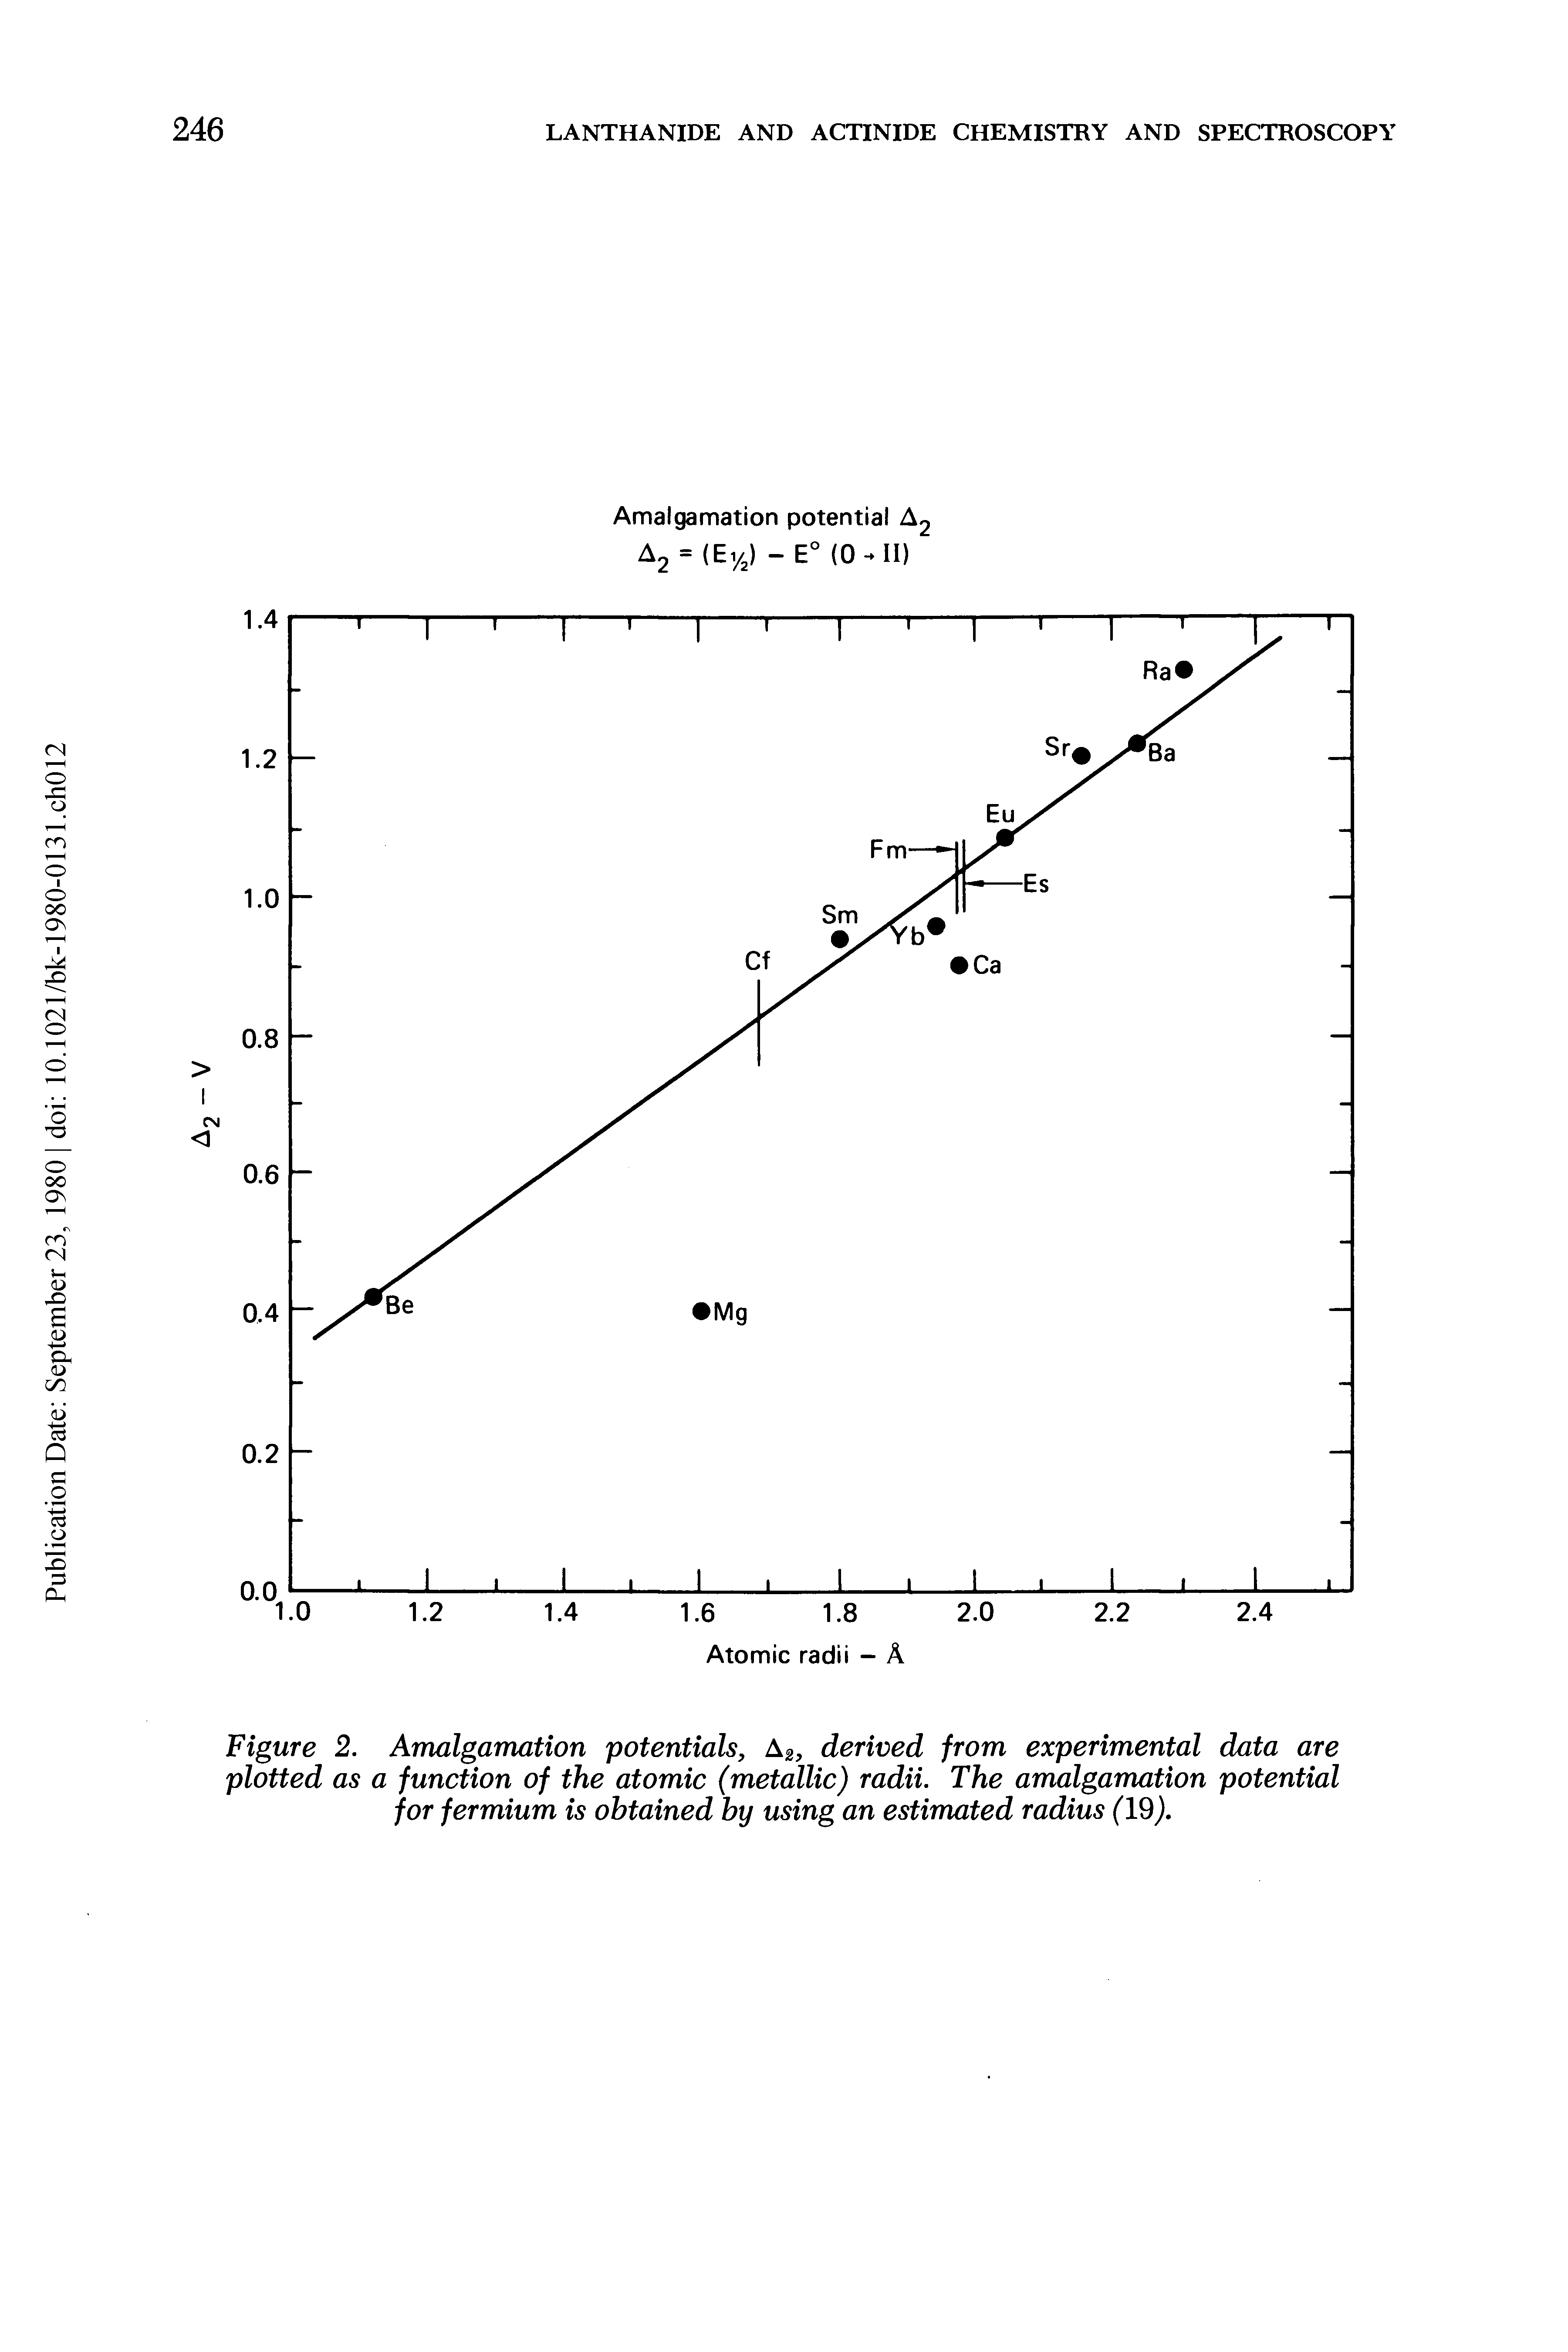 Figure 2. Amalgamation potentials, A2, derived from experimental data are plotted as a function of the atomic (metallic) radii. The amalgamation potential for fermium is obtained by using an estimated radius (19).